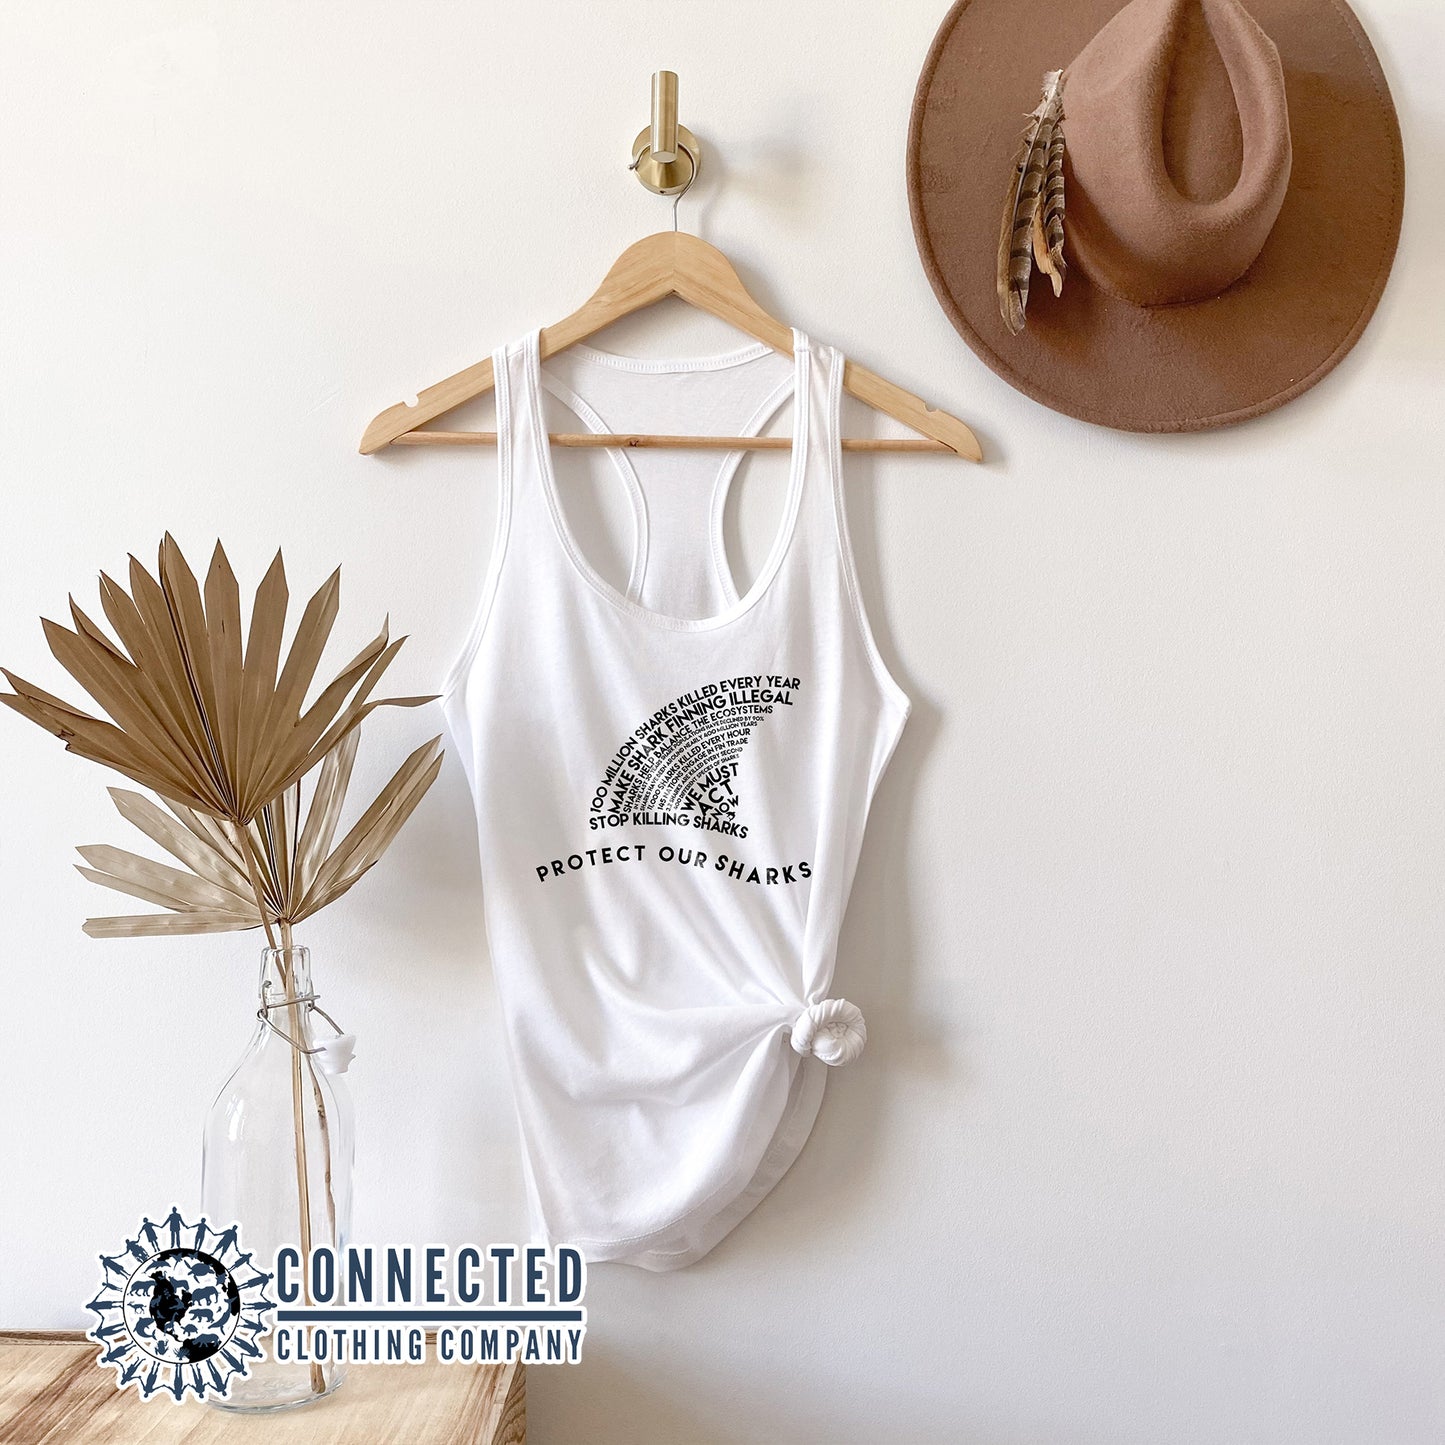 White Protect Our Sharks Women's Tank Top - Connected Clothing Company - Ethically and Sustainably Made - 10% of profits donated to Oceana shark conservation